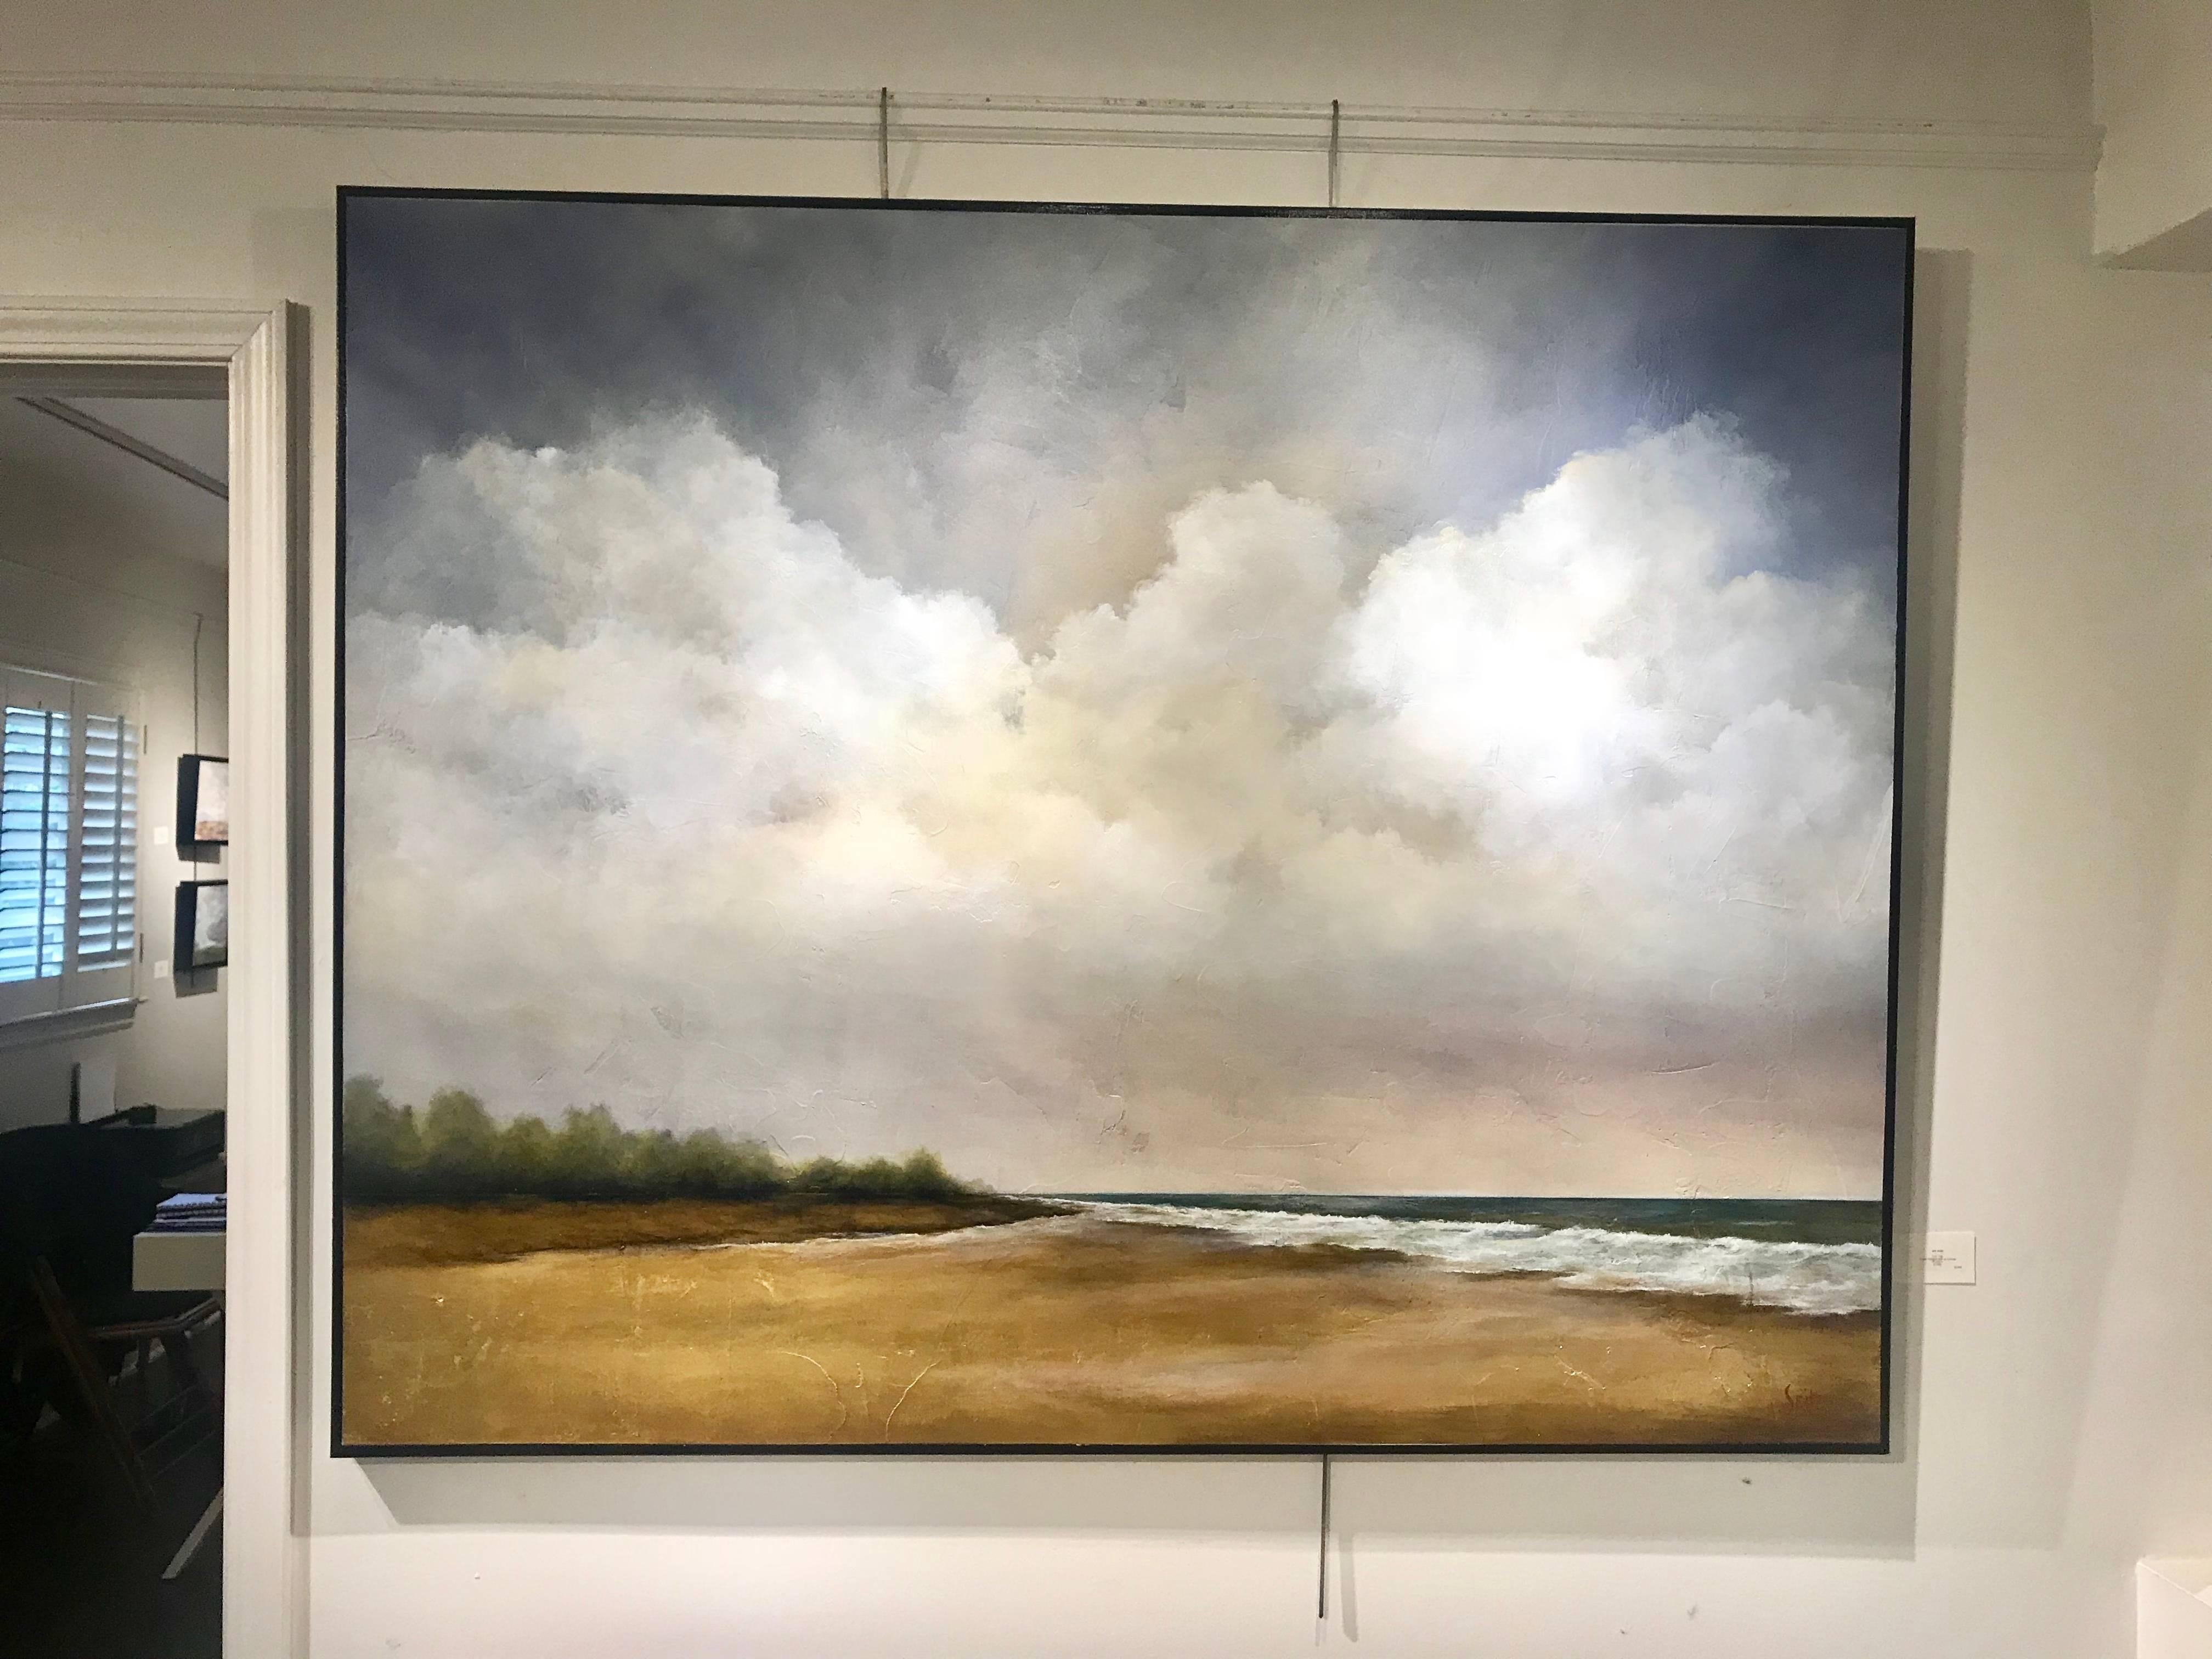 American artist Jim Seitz created this acrylic and gold leaf on canvas seascape painting in 2017 and titled it 'Low Tide'. The subject is self explanatory, the artist rendered an exquisite depiction of the sea or the ocean at low tide, allowing us